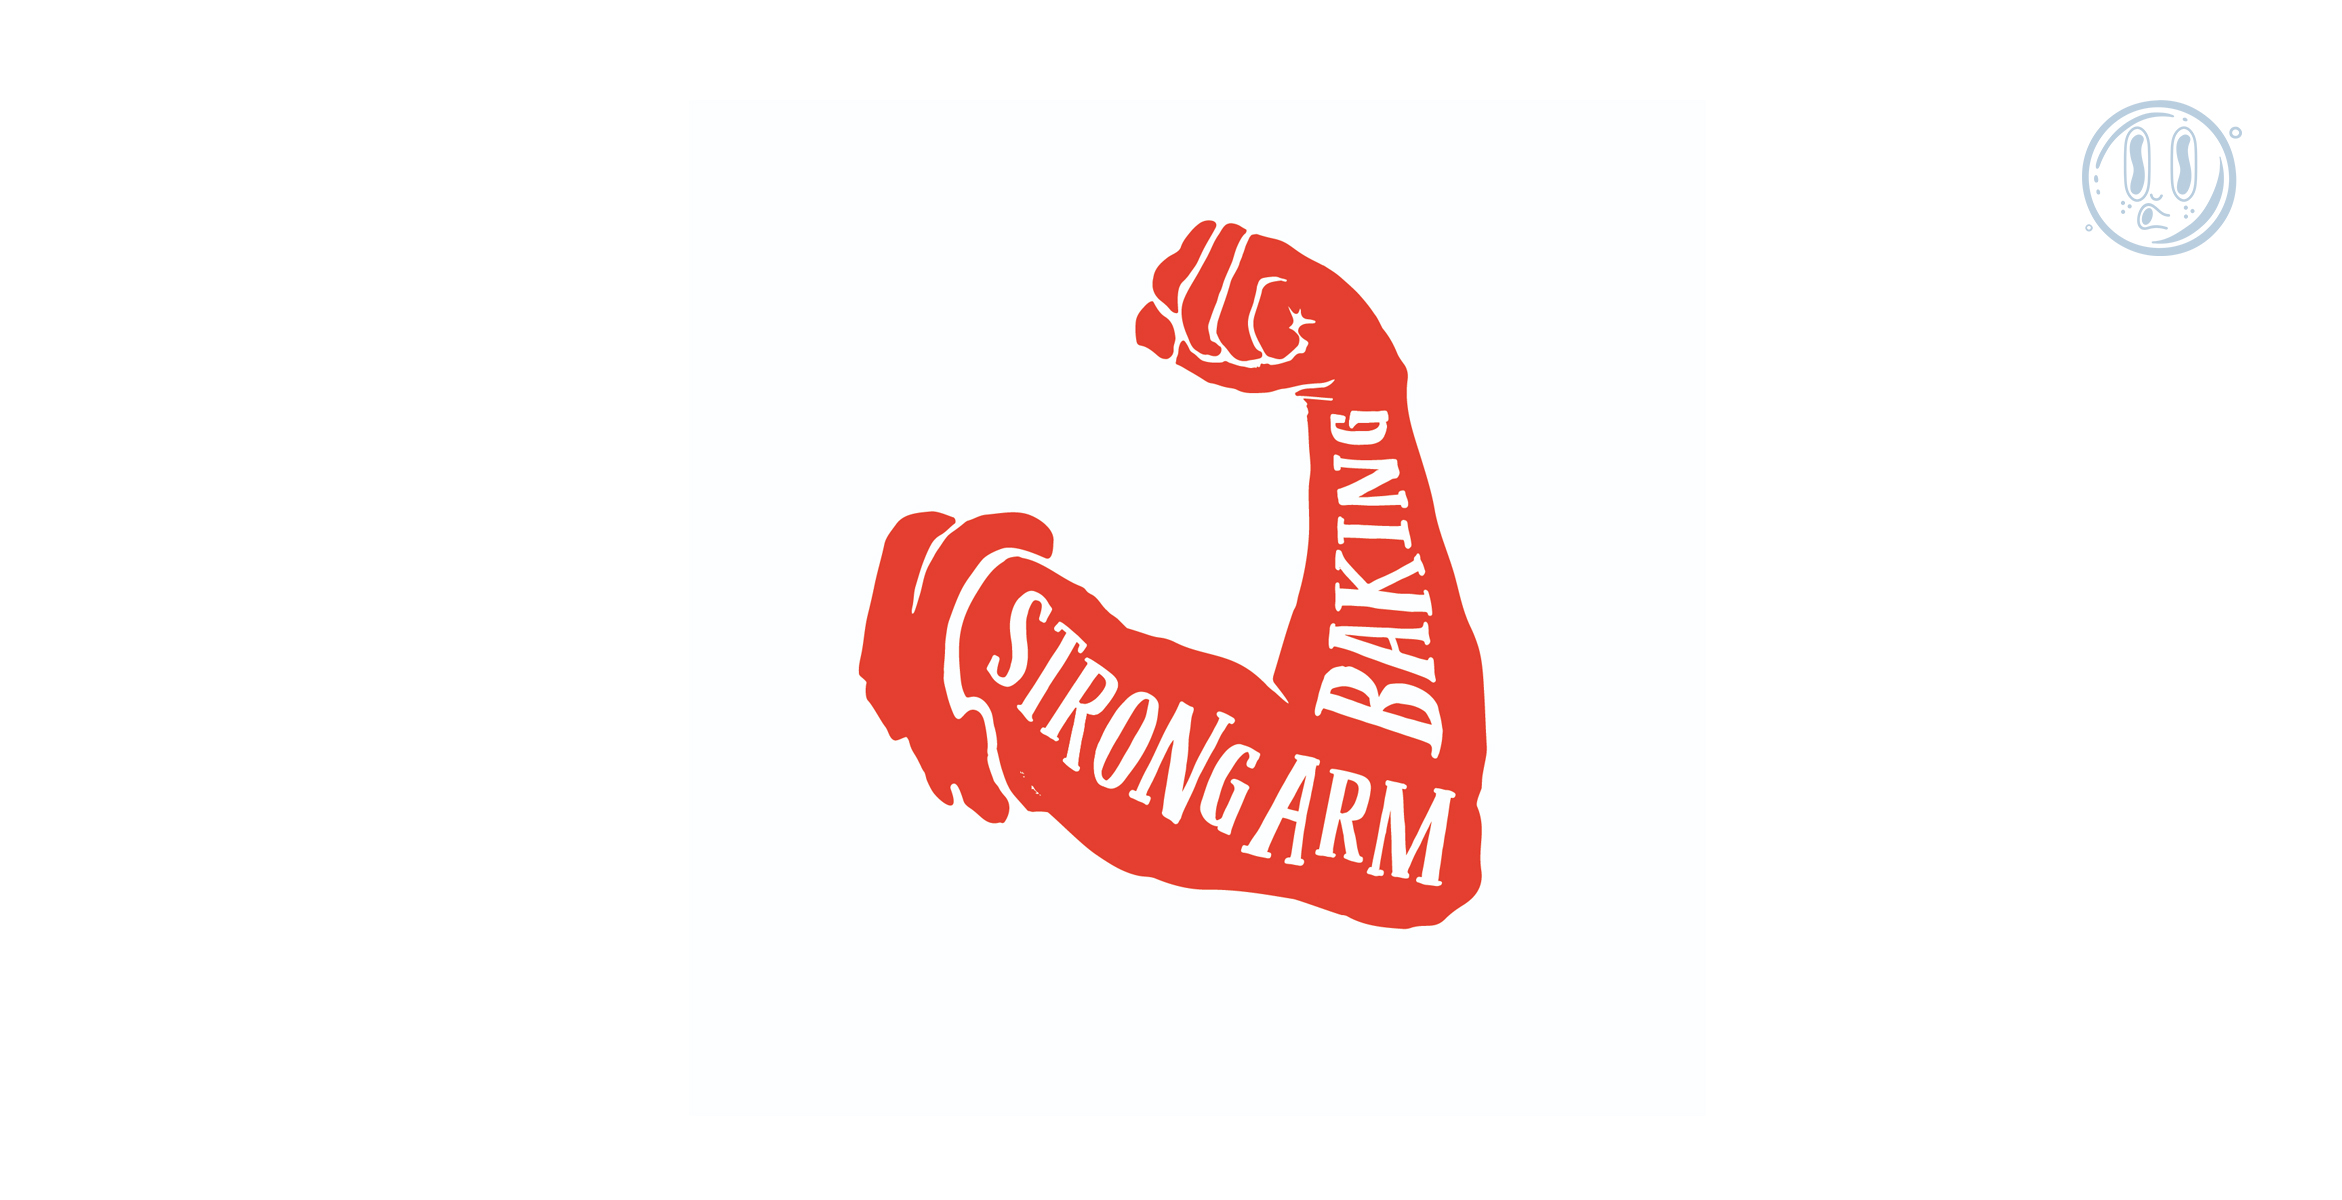 strong-arm_after